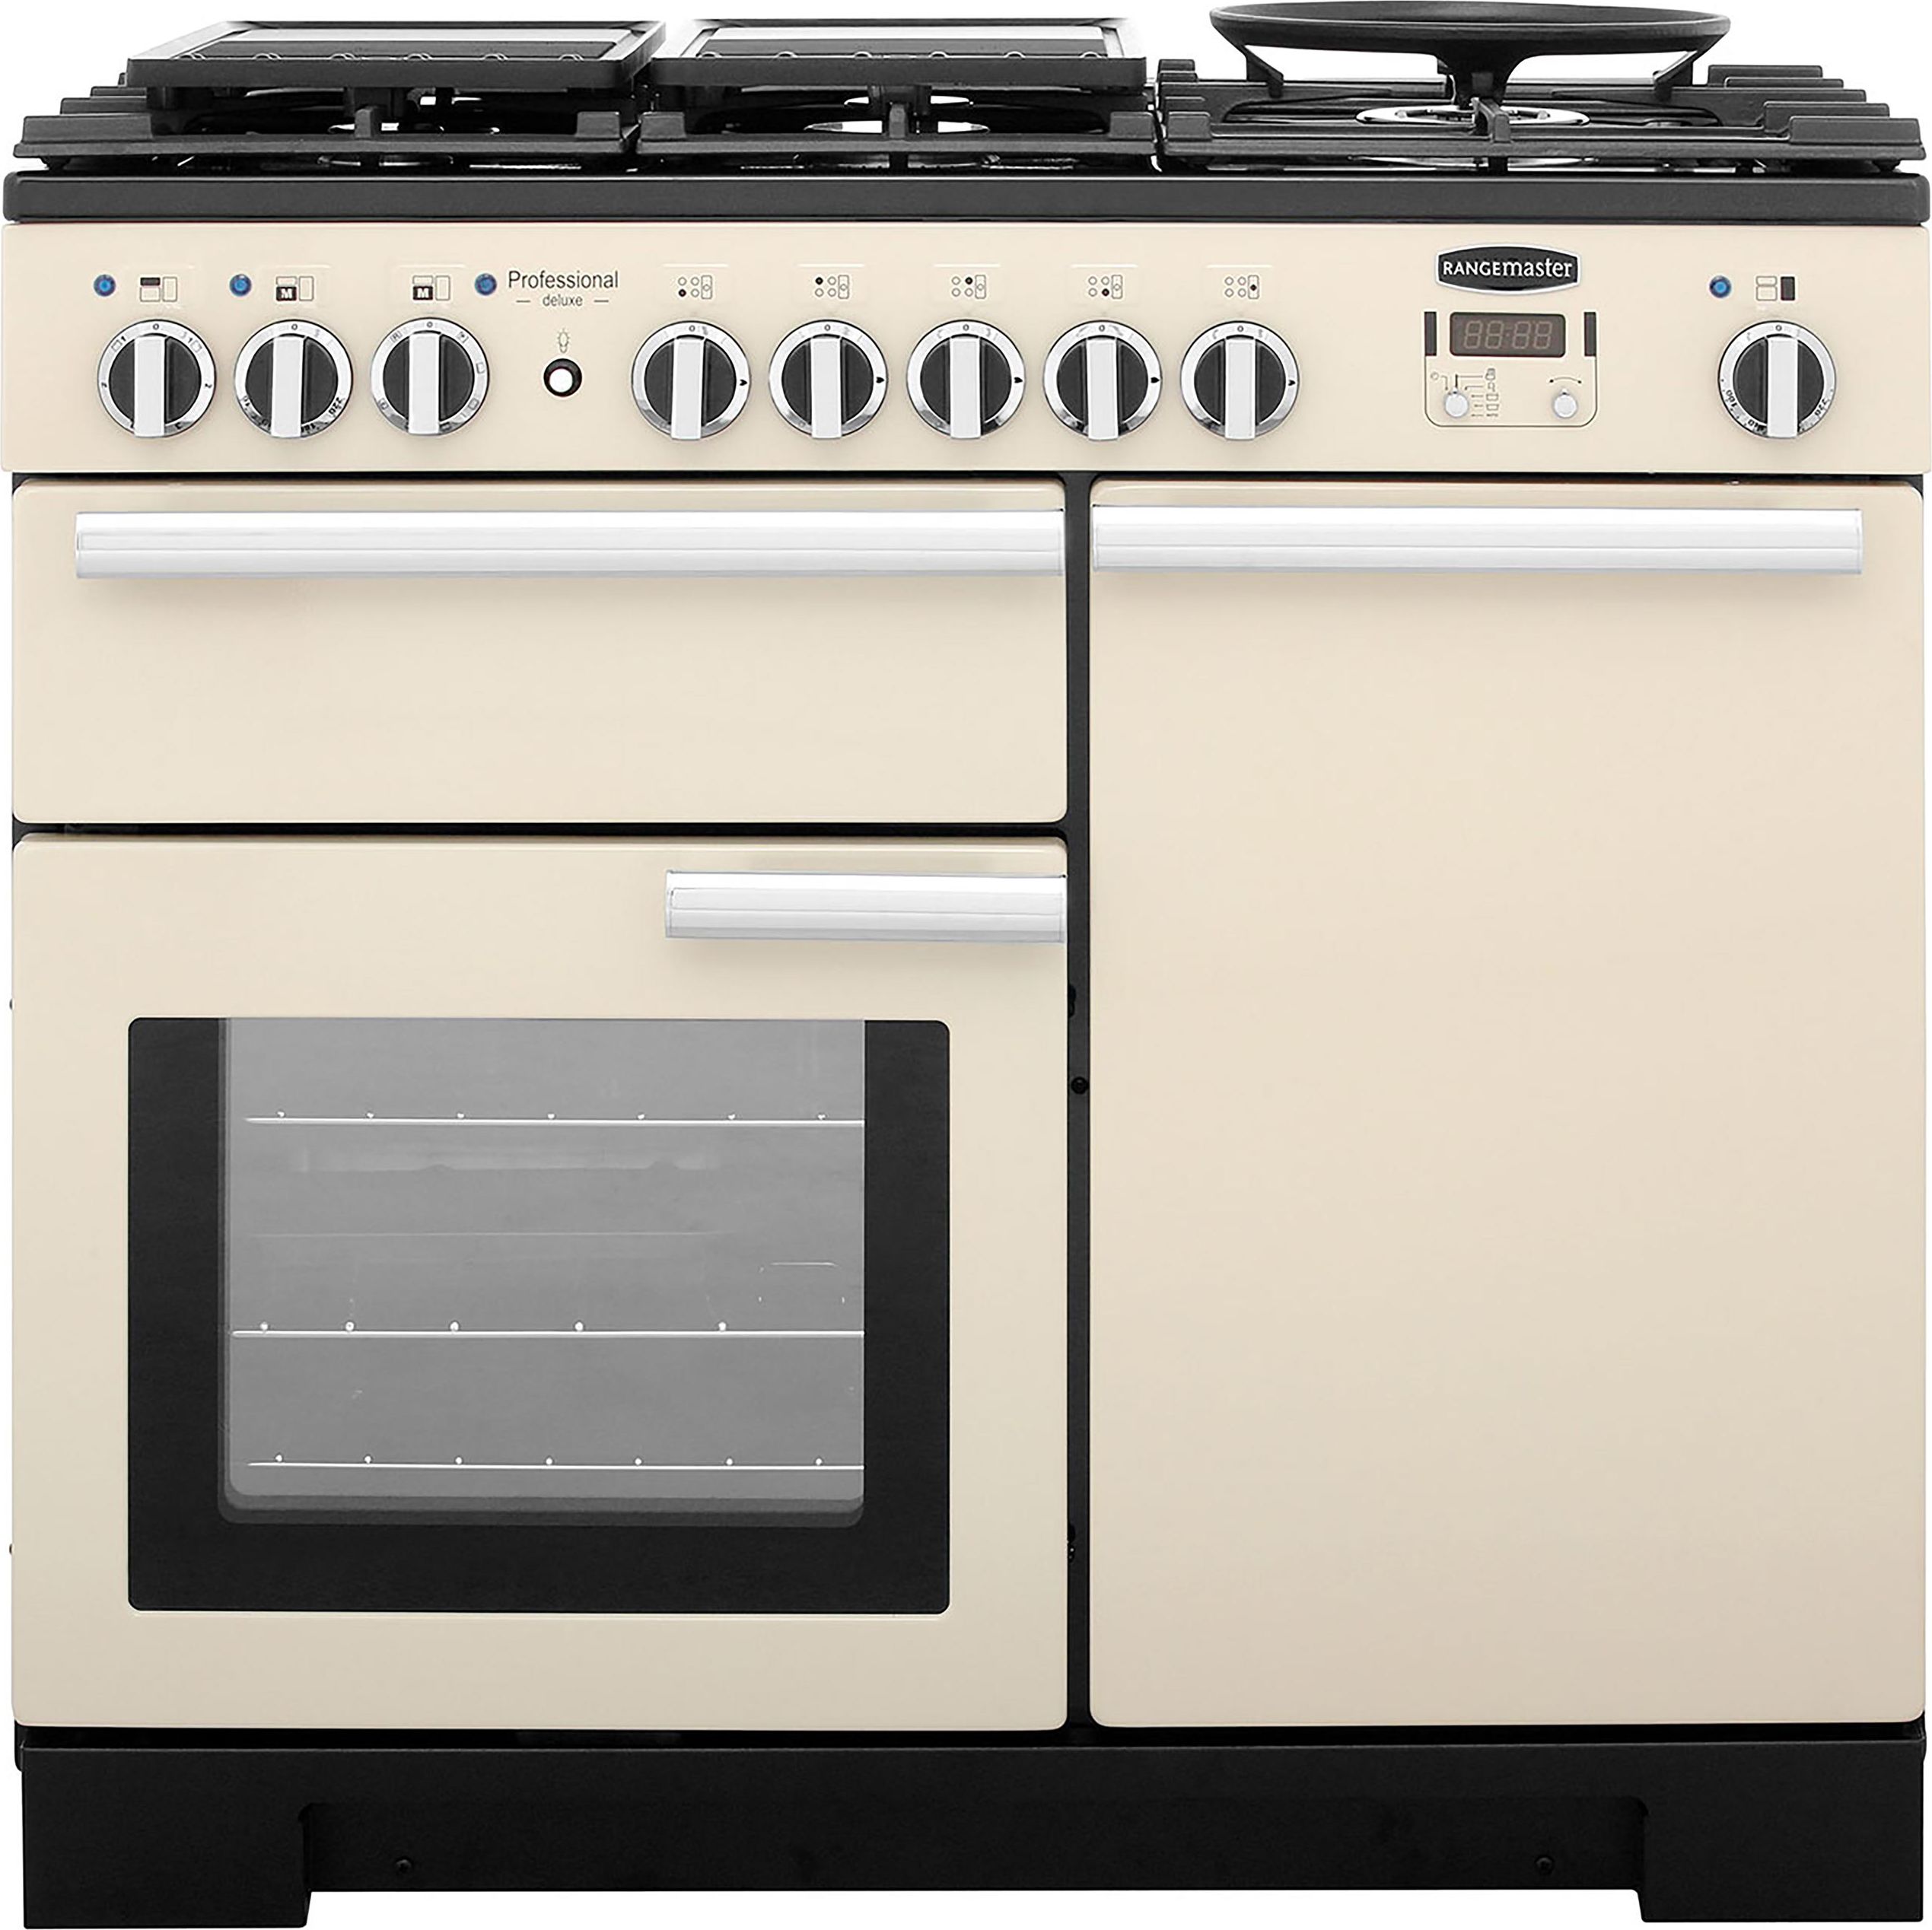 Rangemaster Professional Deluxe PDL100DFFCR/C 100cm Dual Fuel Range Cooker - Cream - A/A Rated, Cream